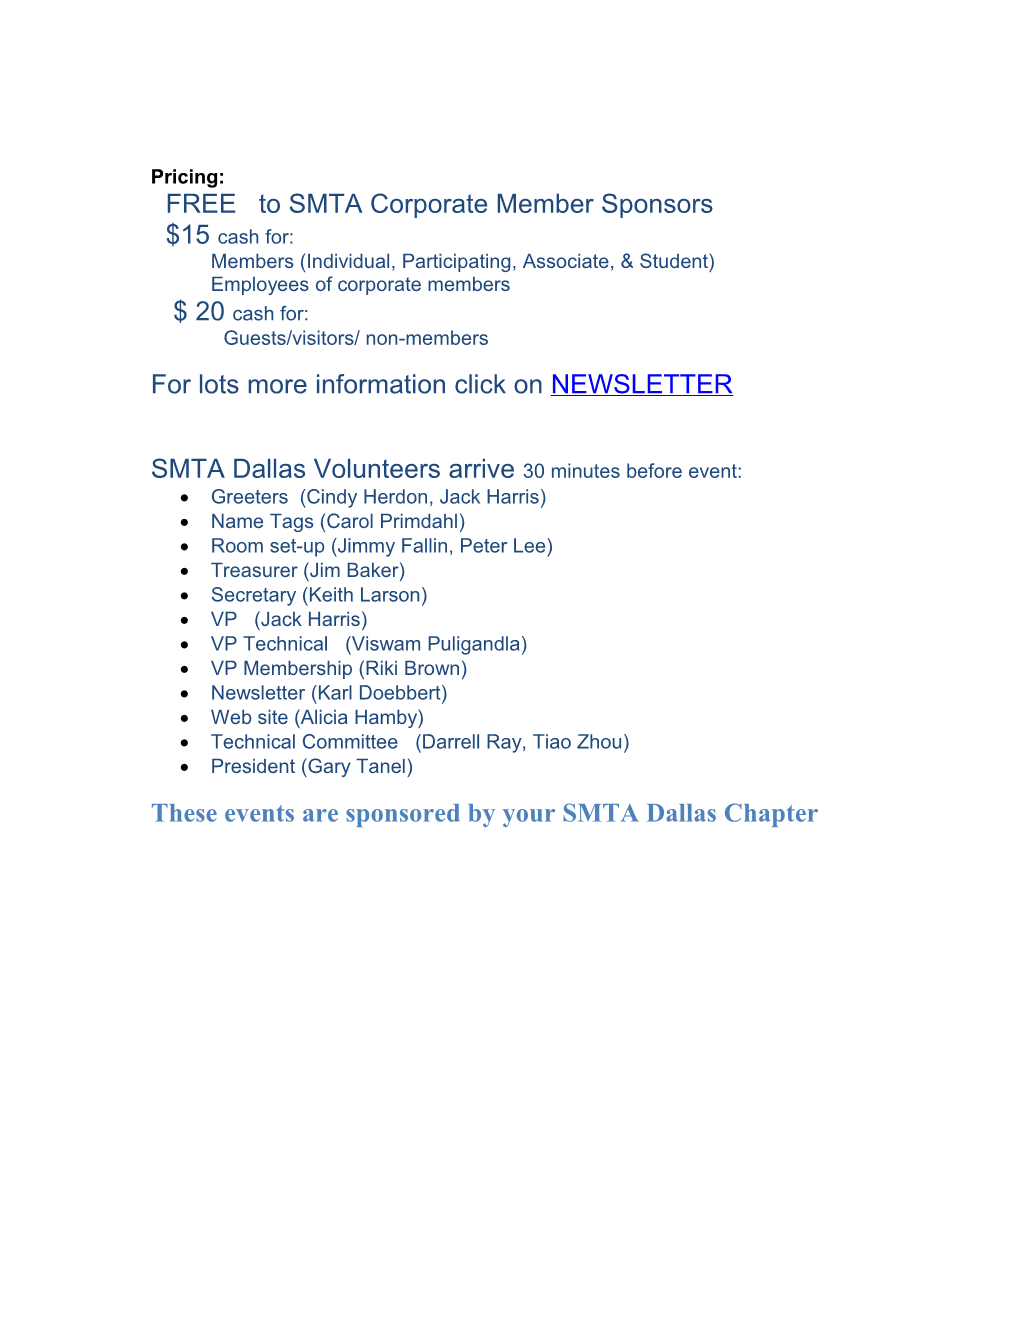 SMTA Members, Non-Members, Students, and Guests Are Welcome